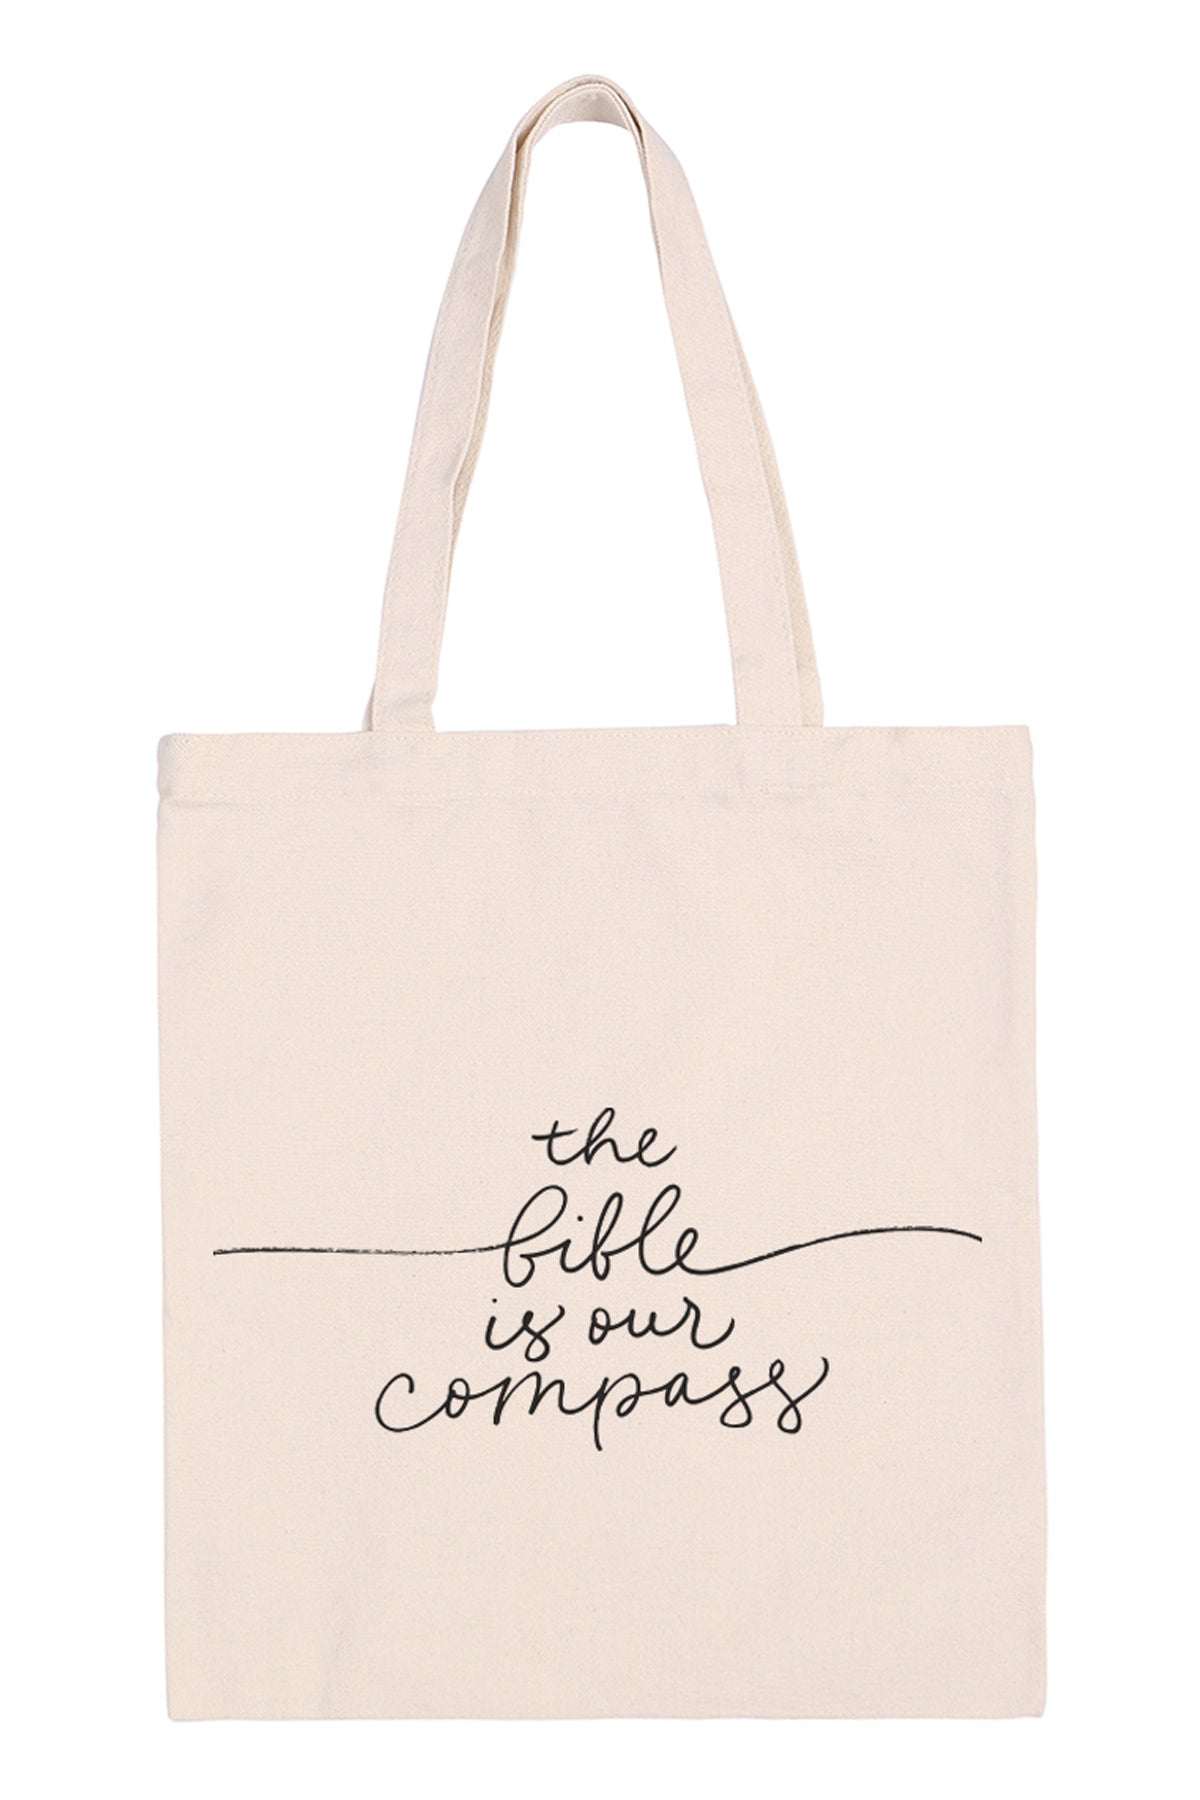 THE BIBLE IS OUR COMPASS PRINT TOTE BAG